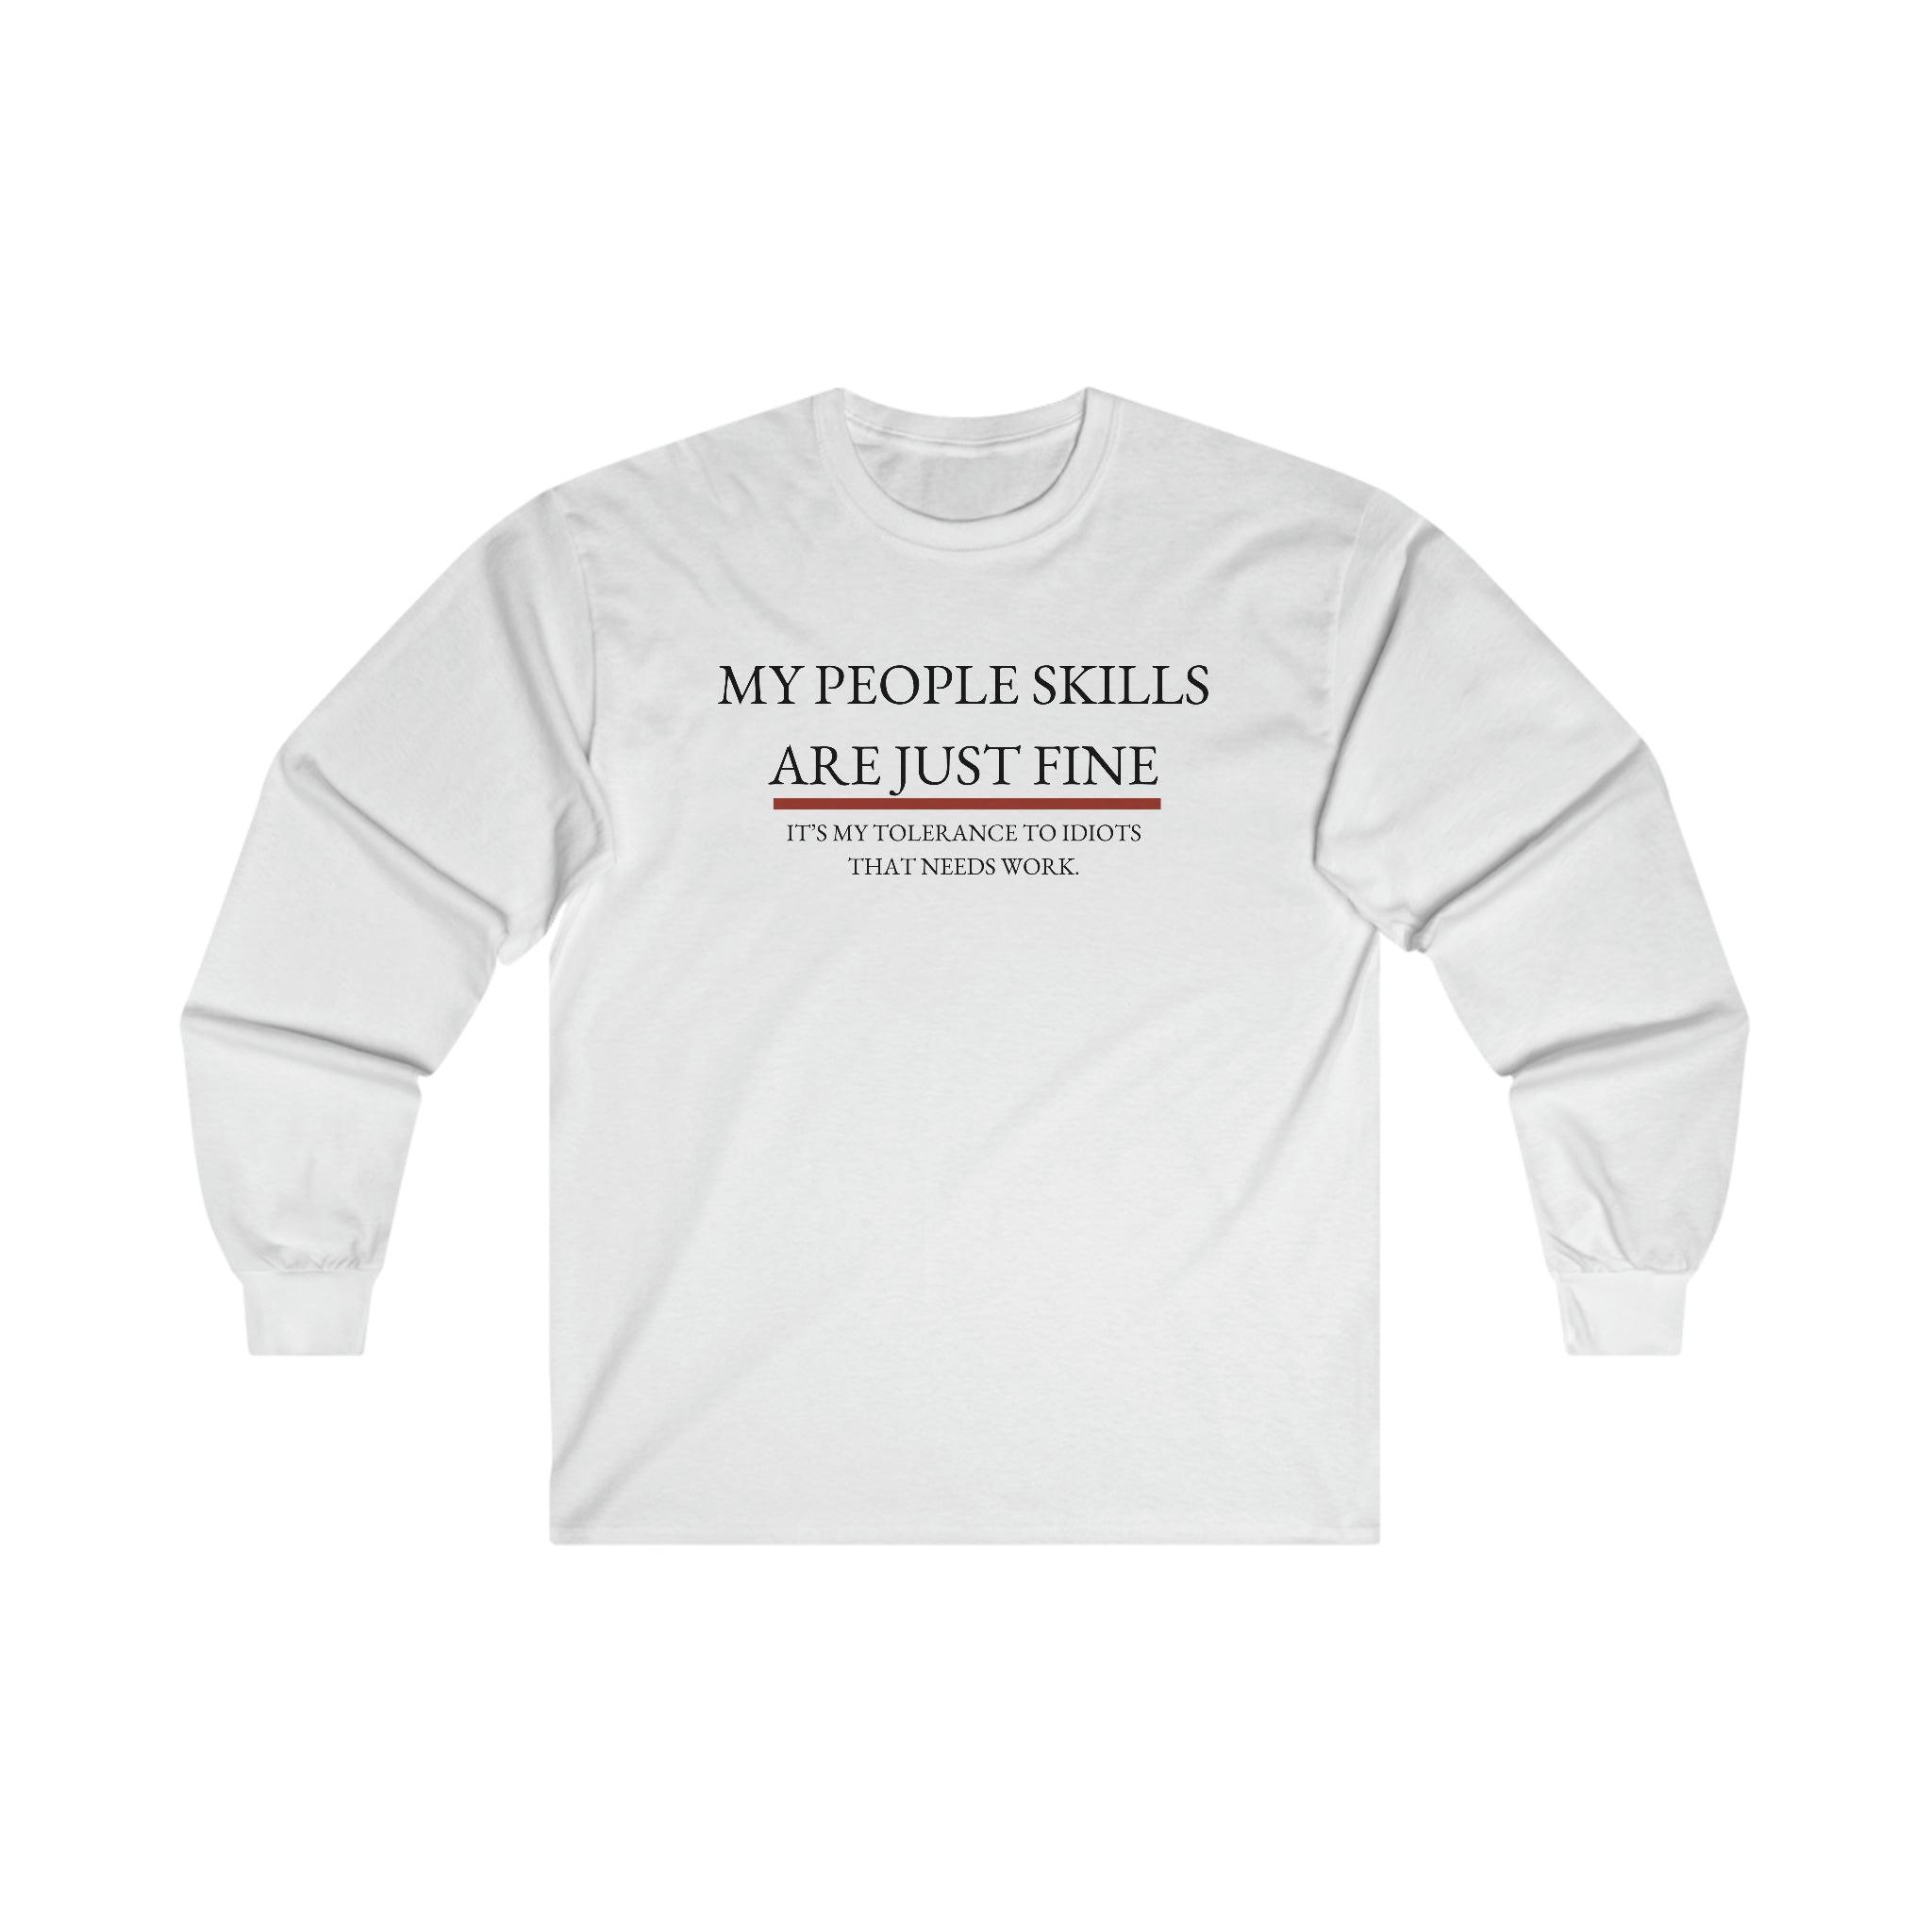 My People Skills Are Just Fine Long-Sleeve T-Shirt